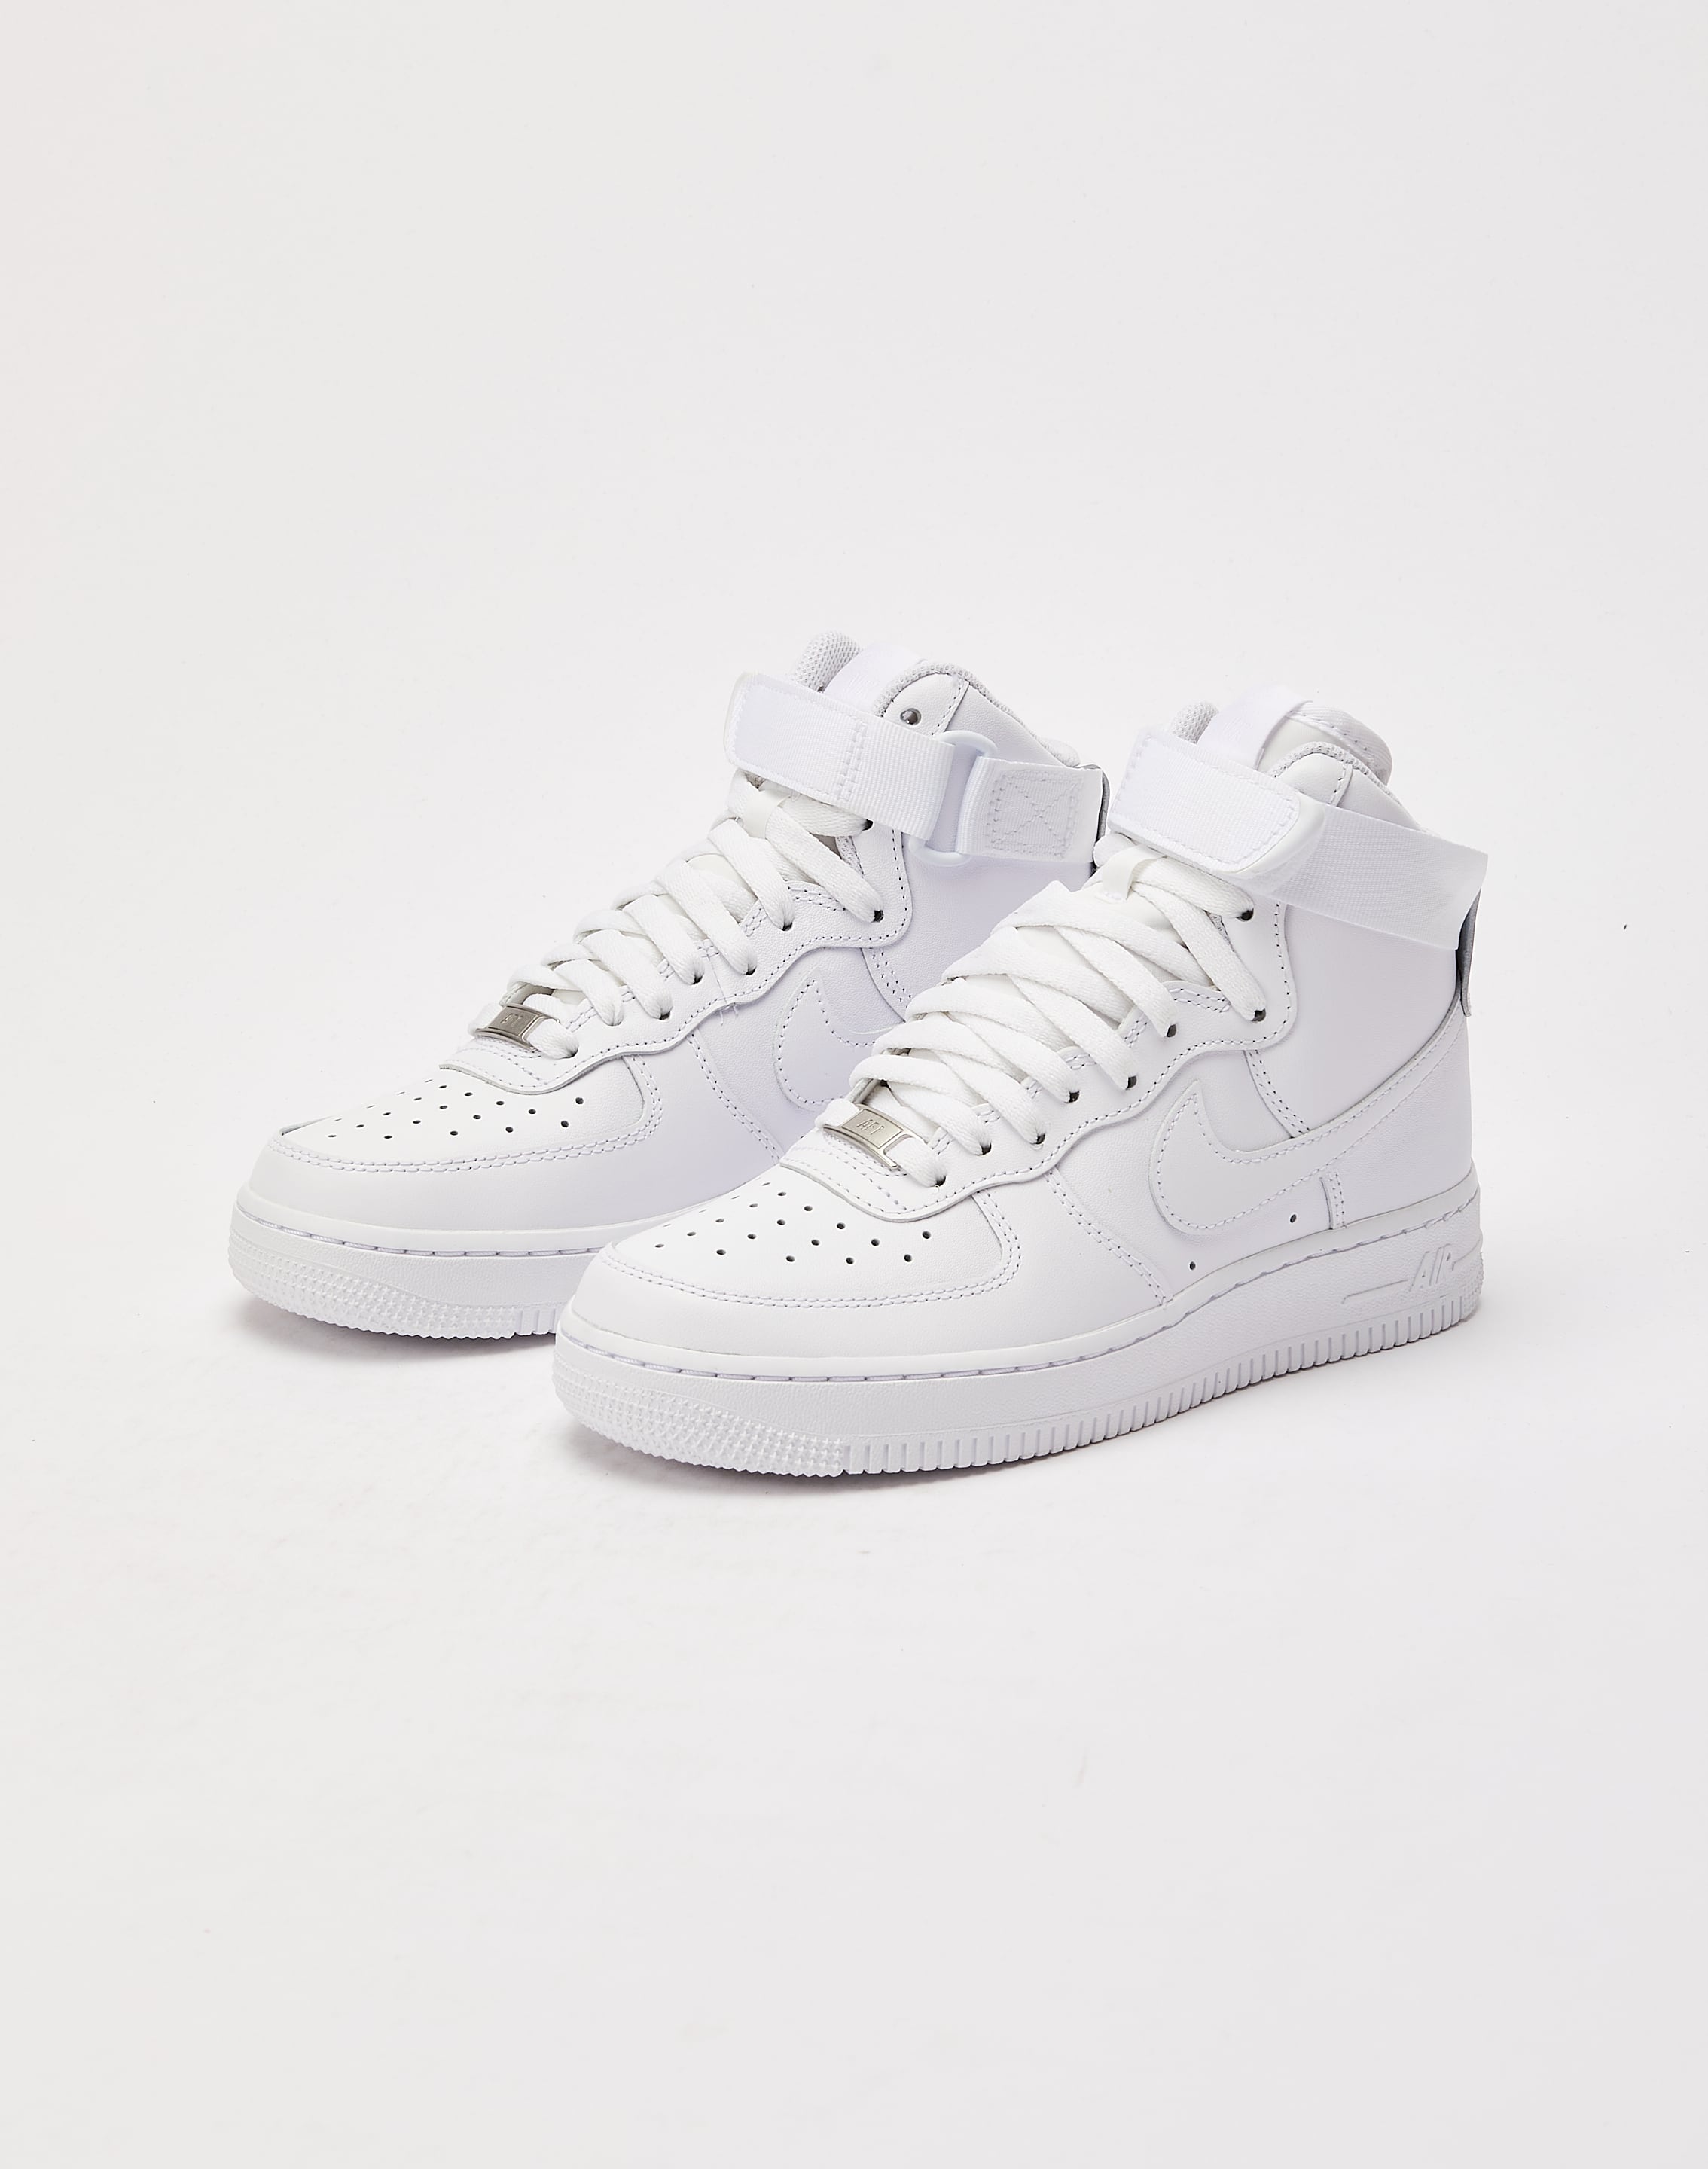 Nike AIR FORCE 1 HIGH – DTLR